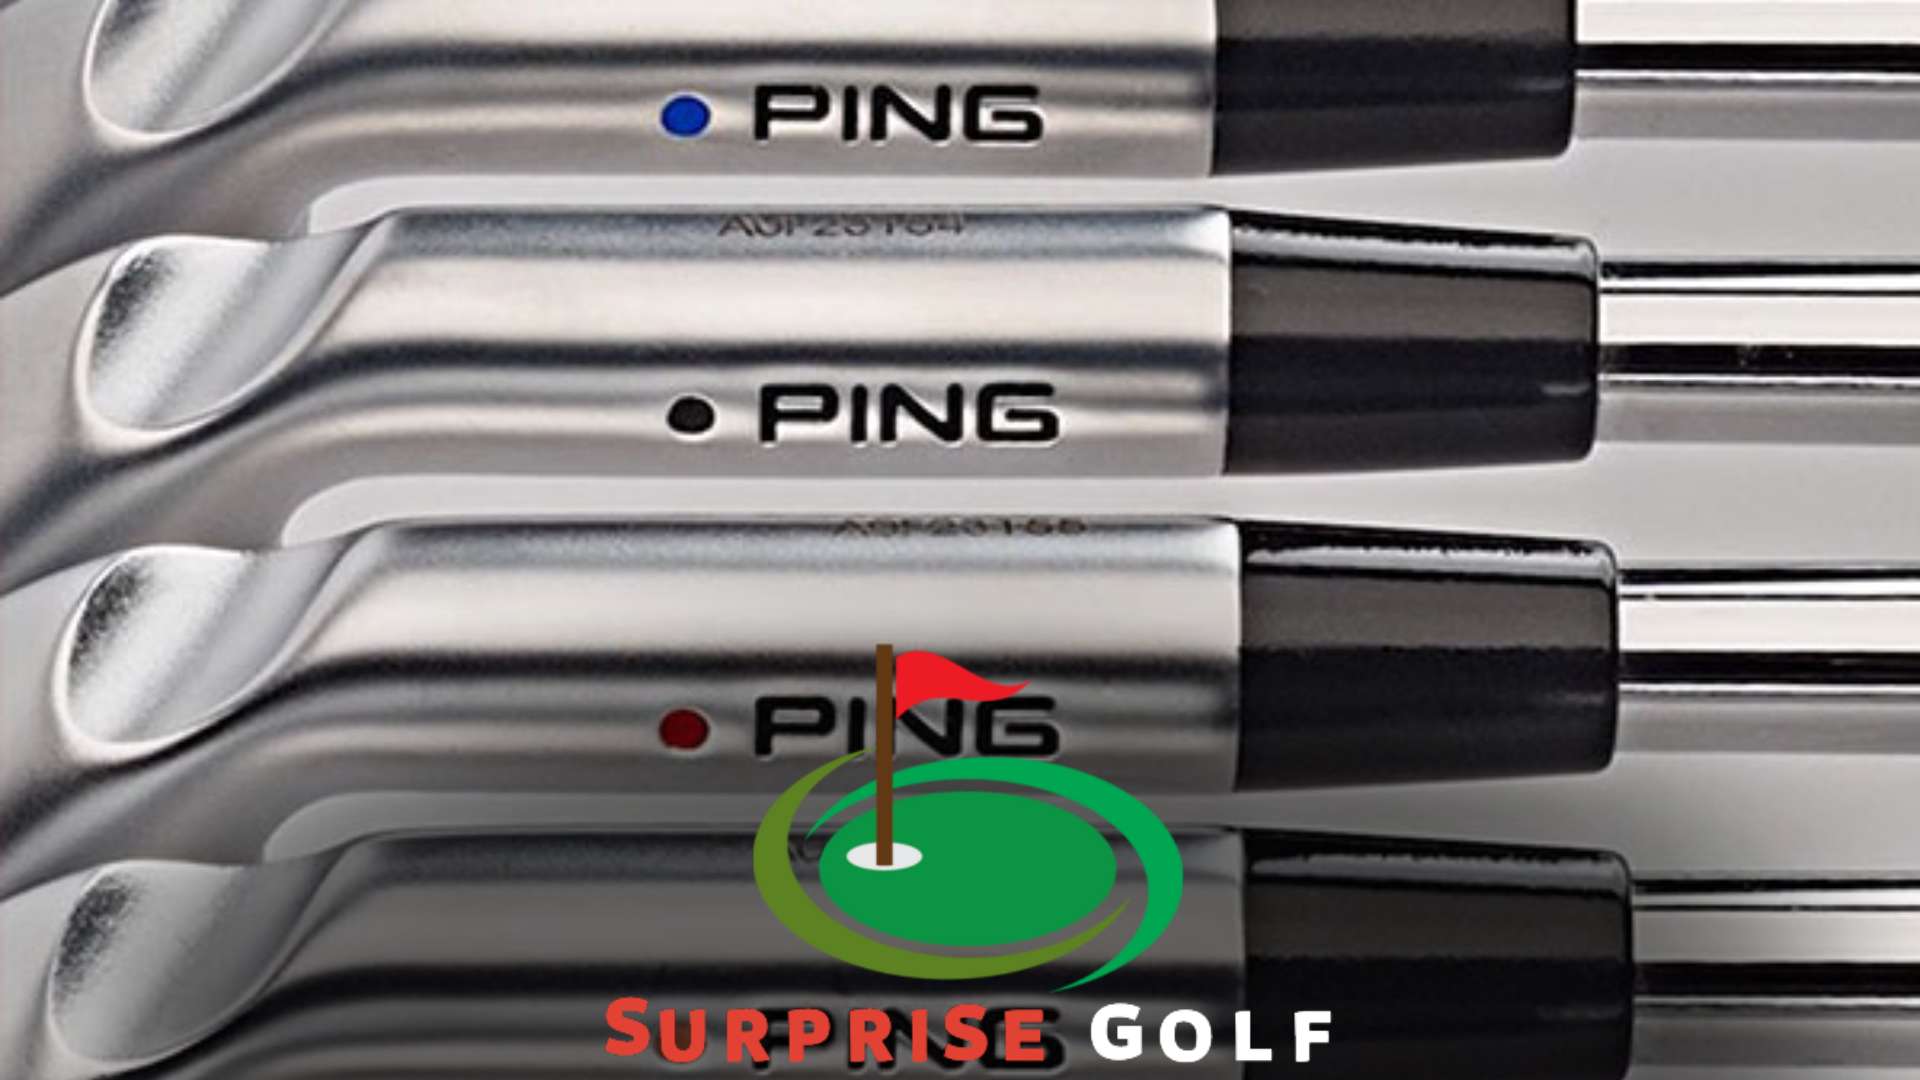 What are the Different Color Dots on Ping Golf Clubs